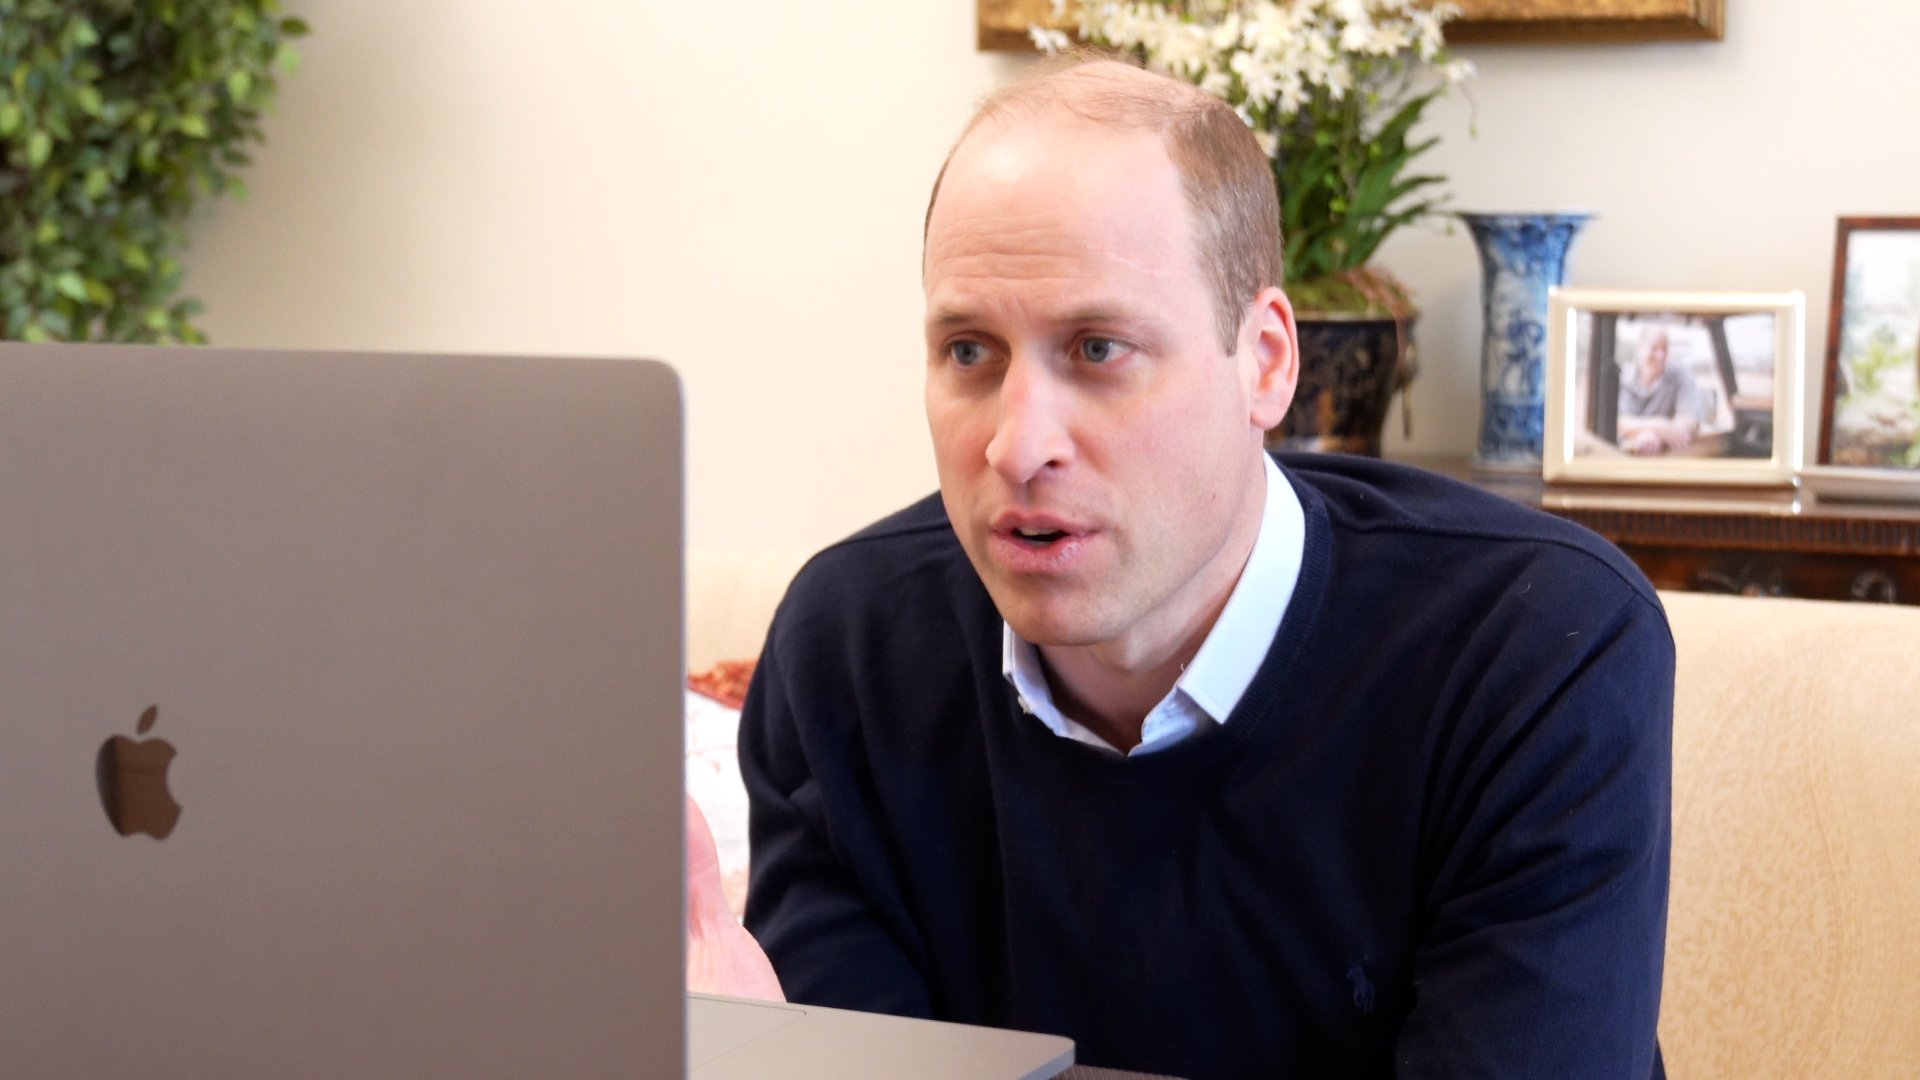 Prince William in a video call with Syrian aid workers supported by the Disasters Emergency Committee’s (DEC) Coronavirus Appeal on March 18, 2021, in the United Kingdom. | Source: Getty Images